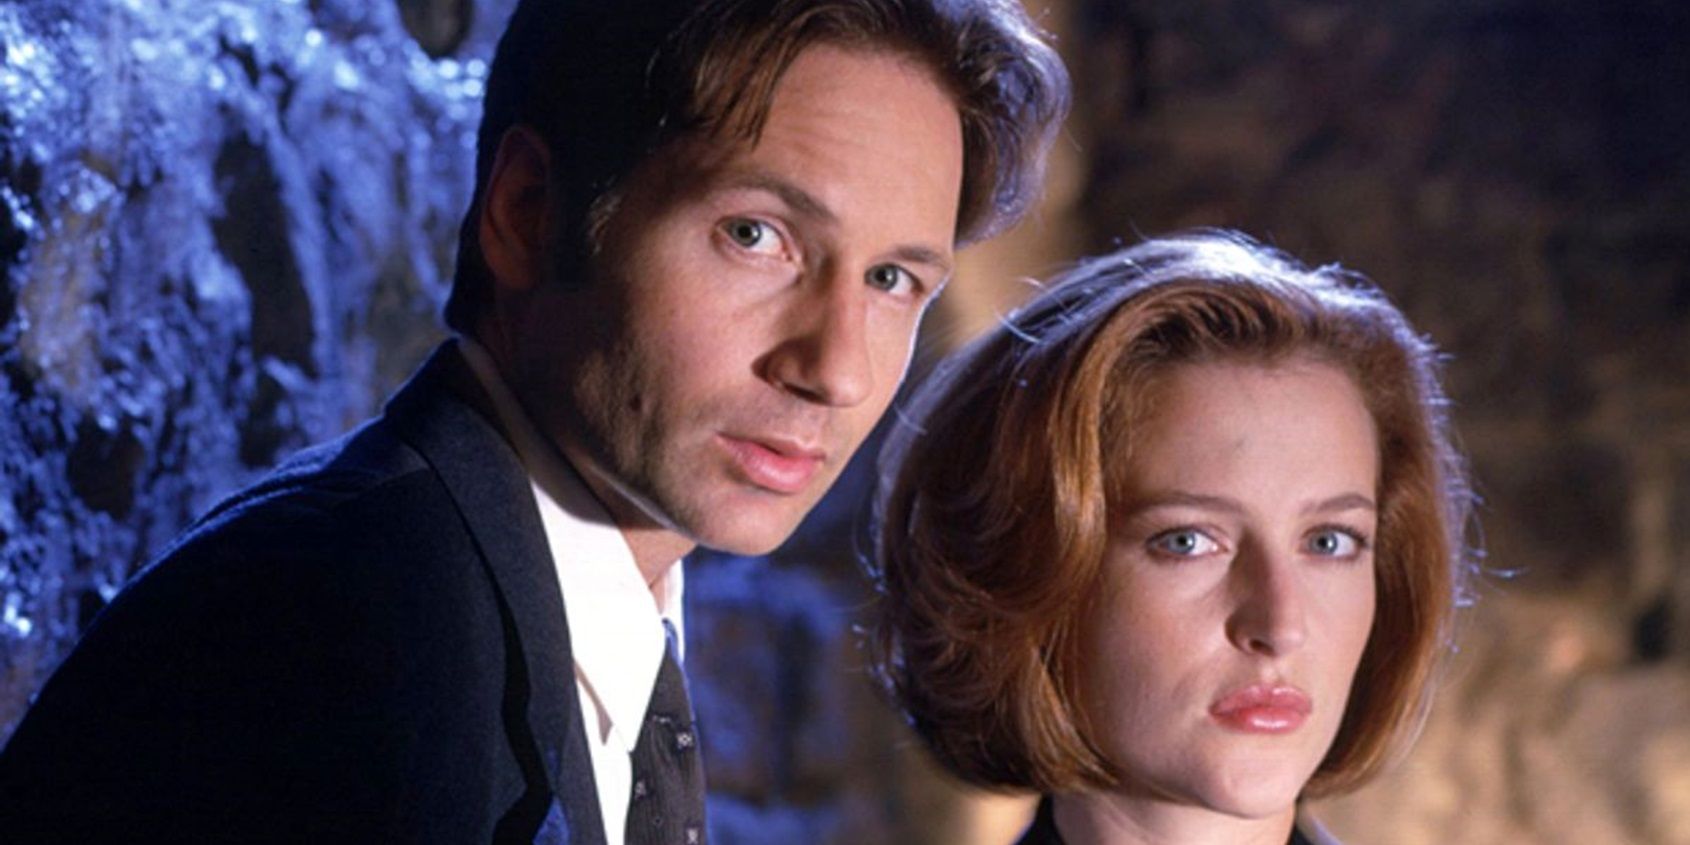 Mulder (David Duchovny) and Scully (Gillian Anderson) stand against a stone wall in a promotional image for The X-Files